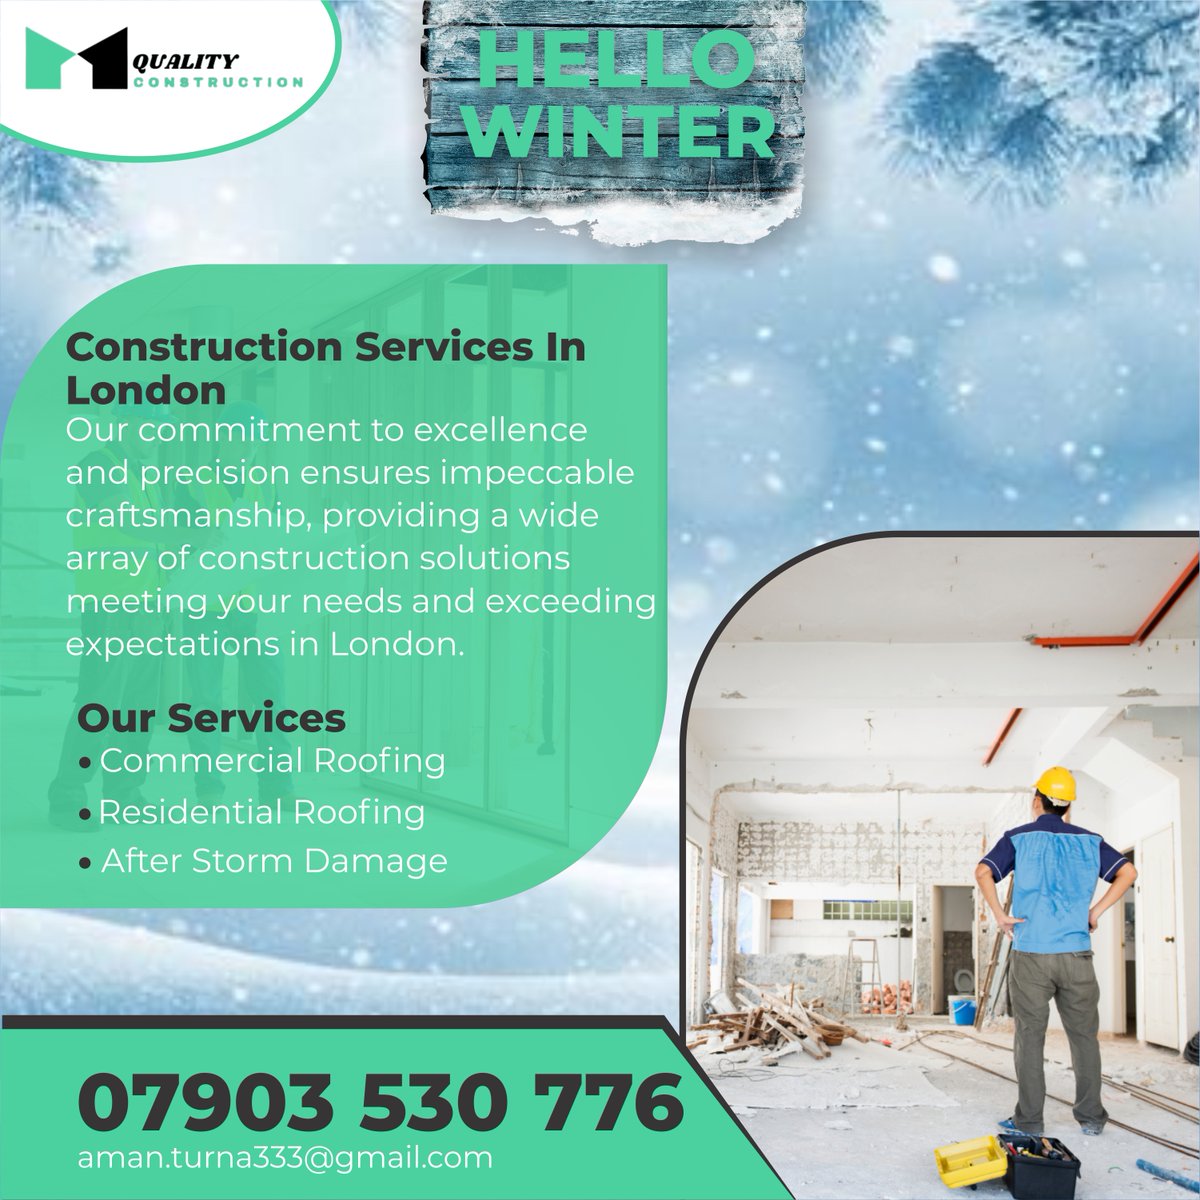 Hello Winter !
Quality Construction: Your go-to for top-notch construction services in London. Transforming visions into reality on Allenby Road, Southall, Middlesex.
qualityconstructionlondon.co.uk/construction-s…
#LondonConstruction
#QualityBuild
#LondonBuilders
#ConstructionLondon
#AllenbyRoadBuild